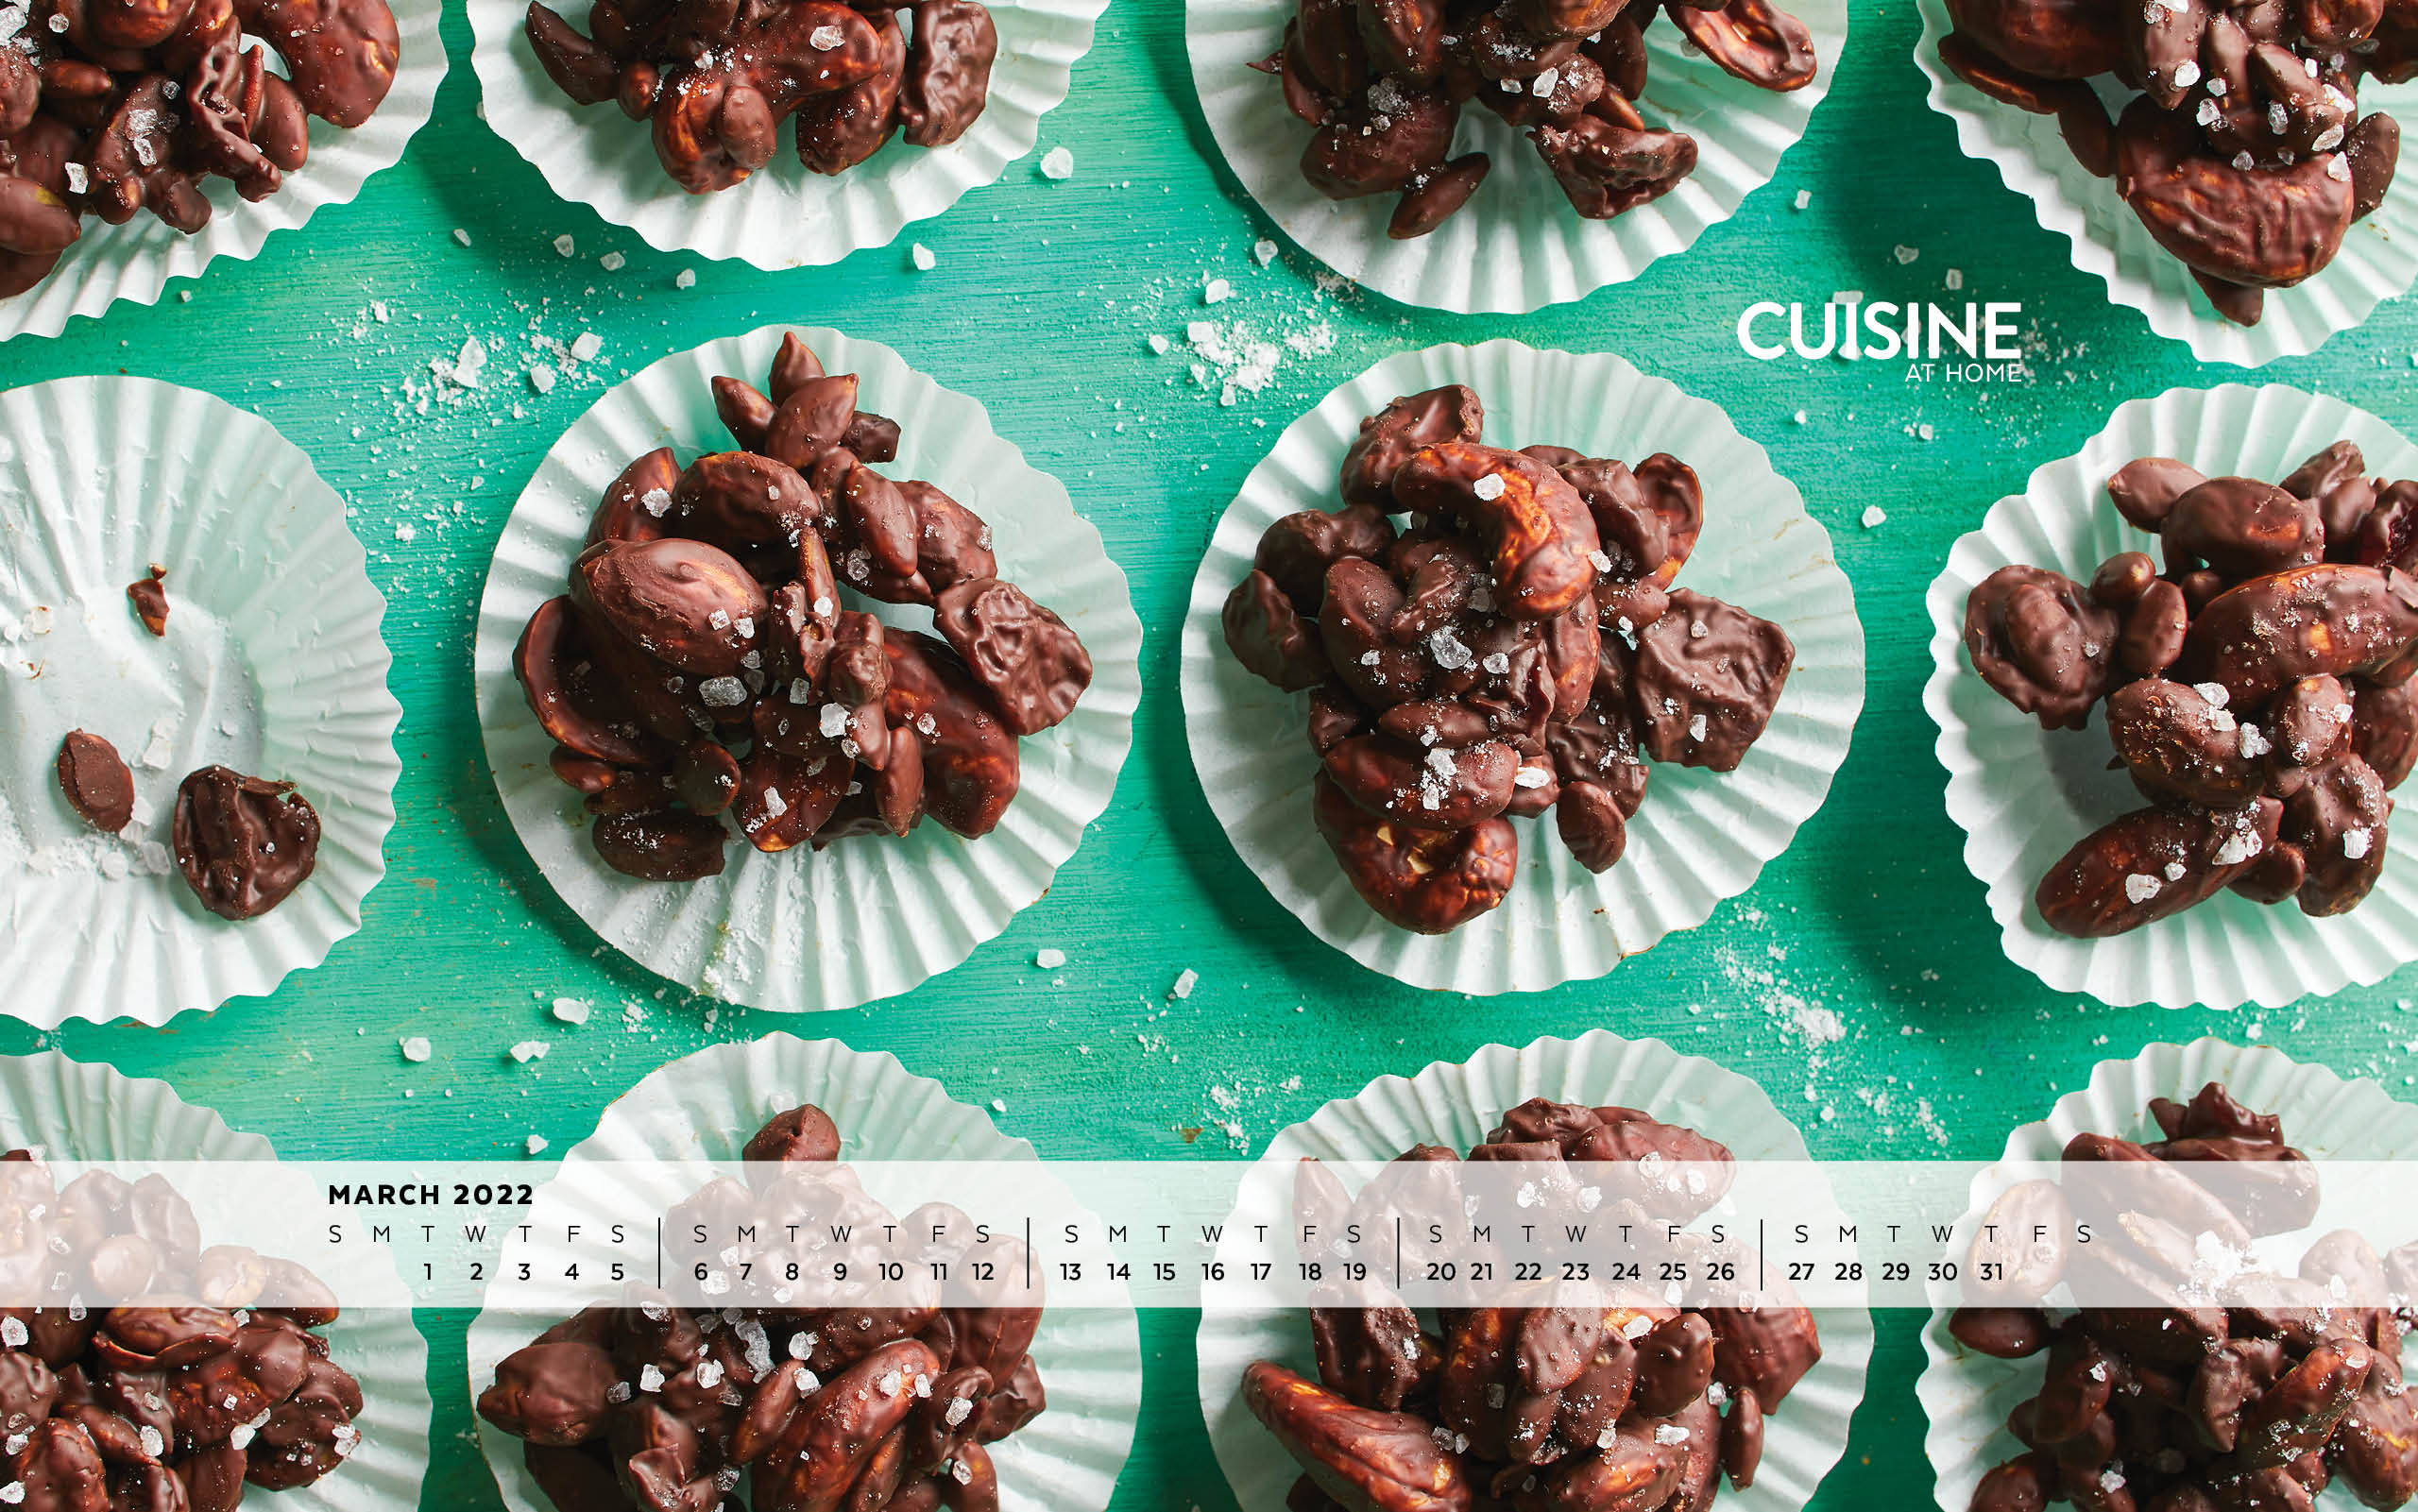 Free Desktop Wallpaper with calendar Windows Mac - March 2022 - Cuisine at Home - Spring aesthetic food cooking baking chocolate healthy snack green mint turquoise aqua